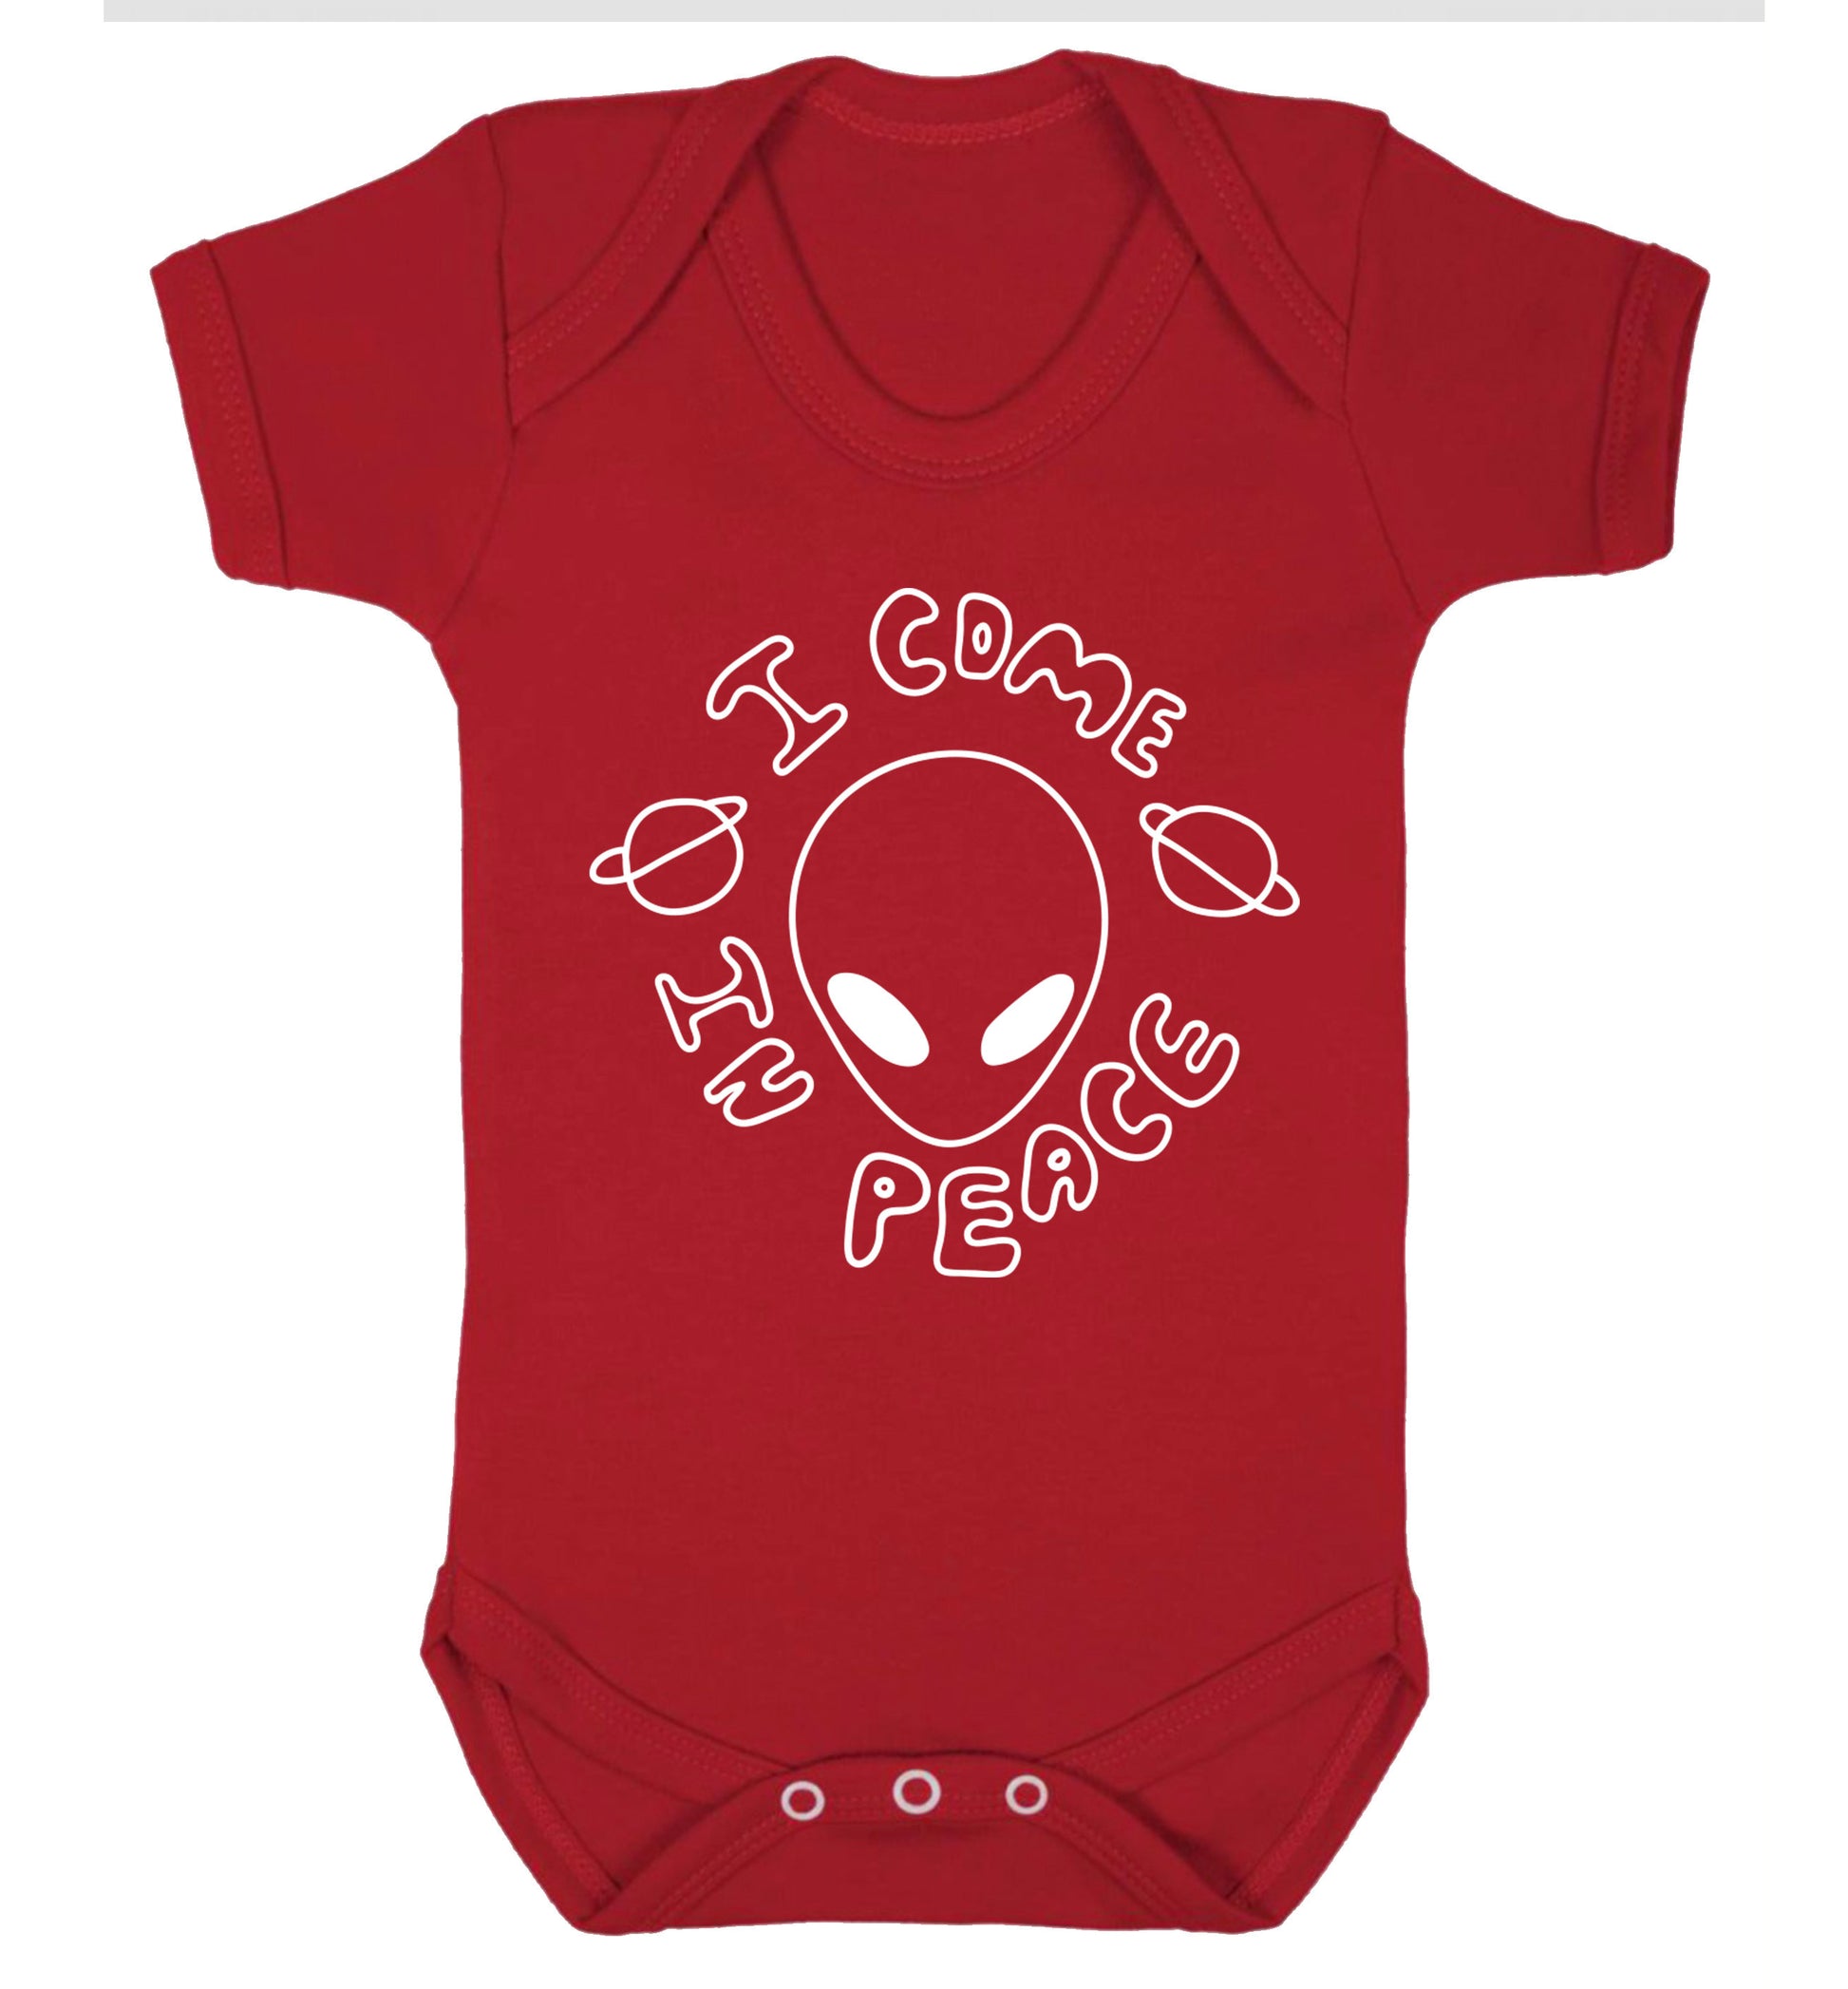 I come in peace Baby Vest red 18-24 months